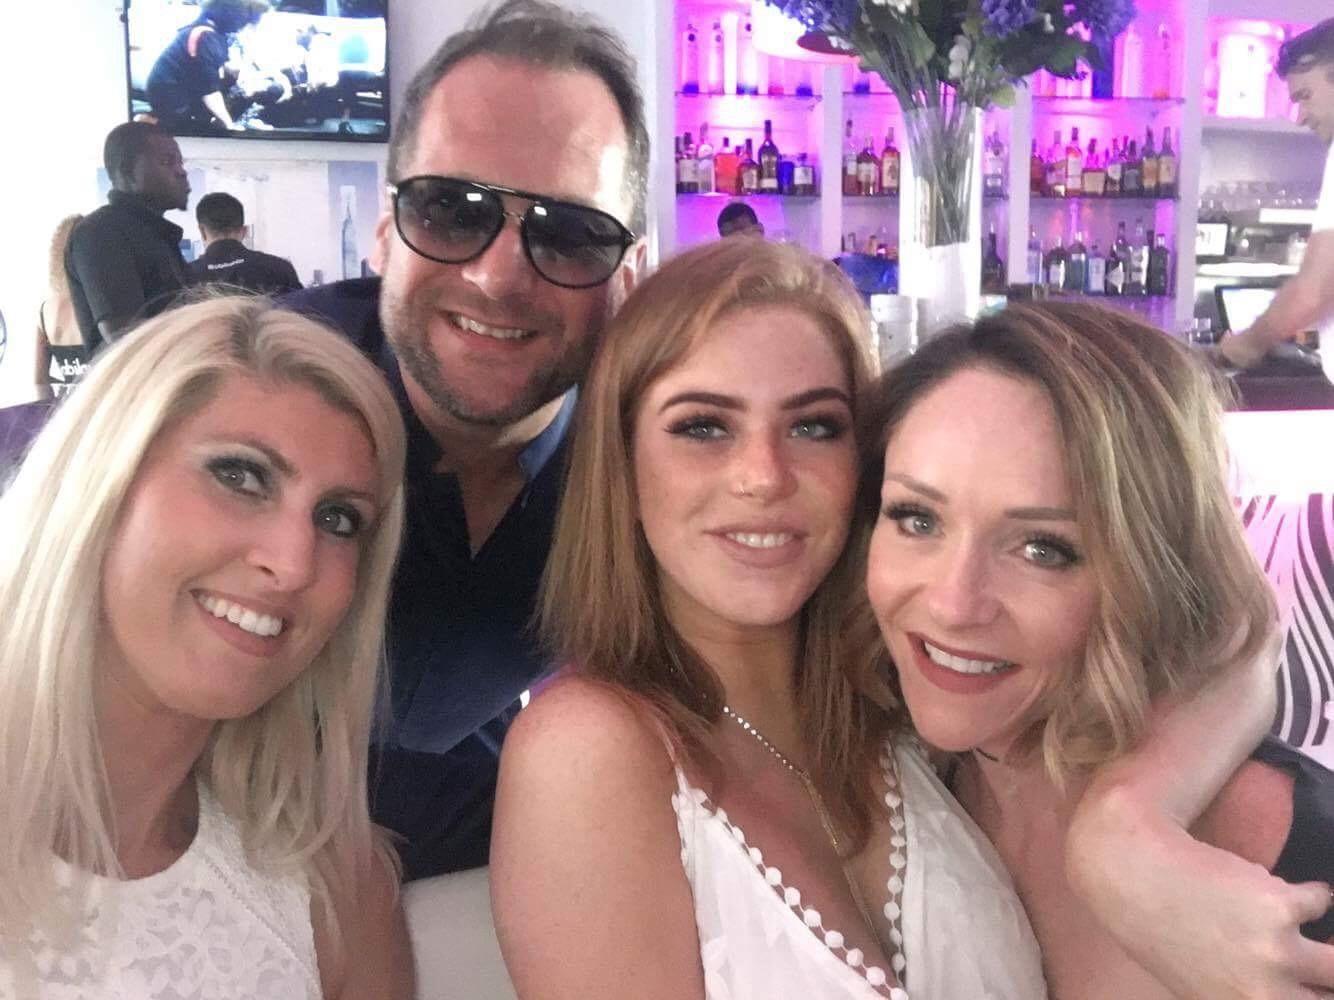 Ian Lucas treated all his employees to three days in Marbella